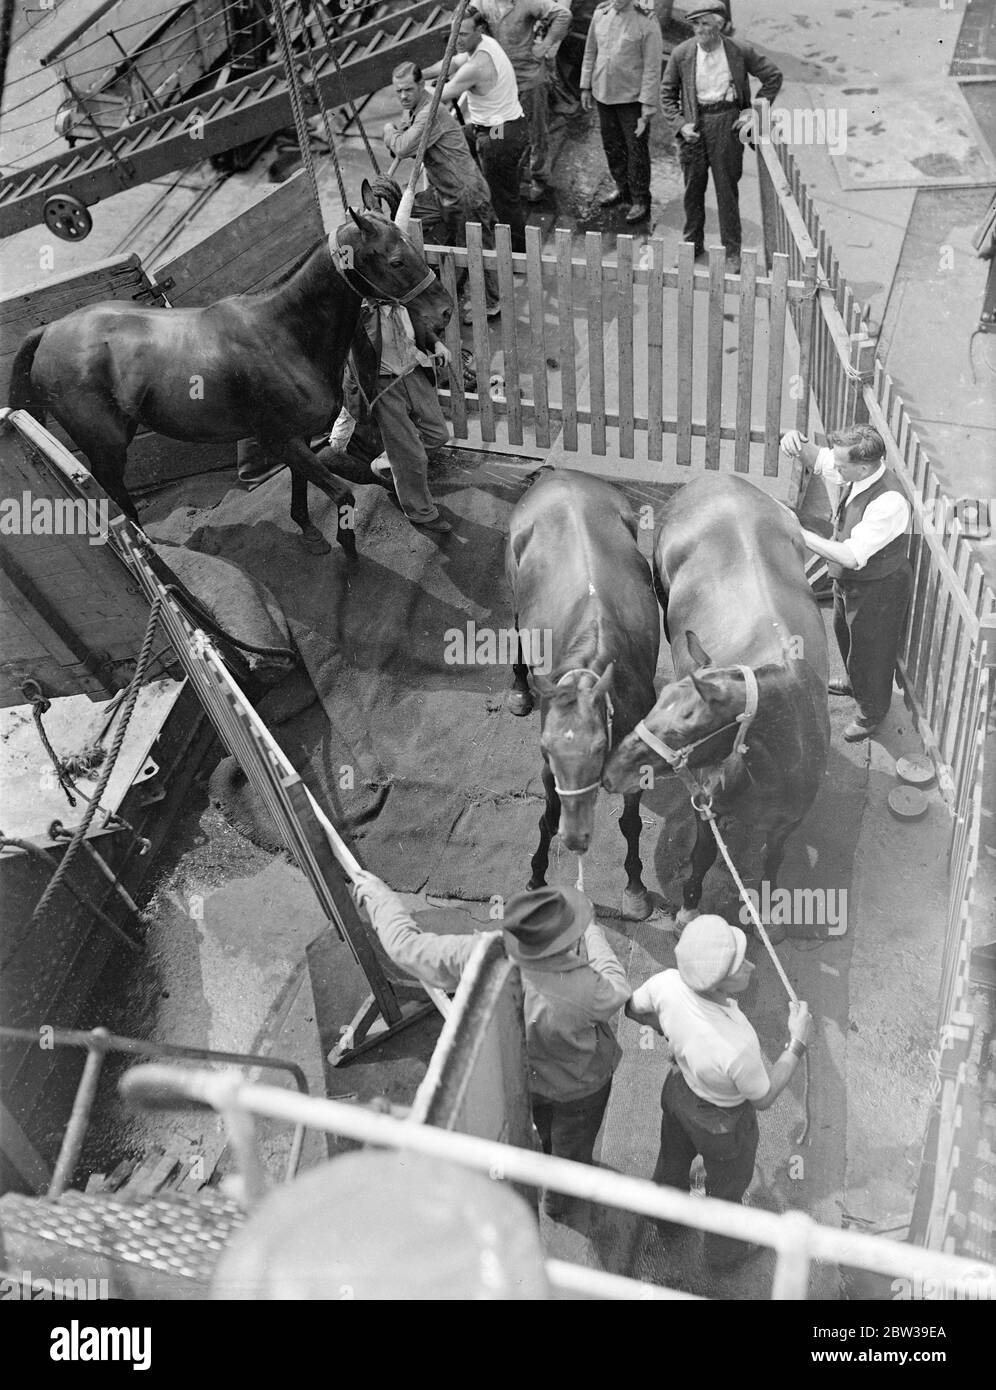 Thirty five polo ponies , which are to be used in the international polo matches at Meadow brook , Long Island , USA were embarked on the American Trader at Royal Albert Docks , London for New York . Photo shows Polo ponies going aboard the American Trader at Royal Albert Docks . 26 July 1935 Stock Photo